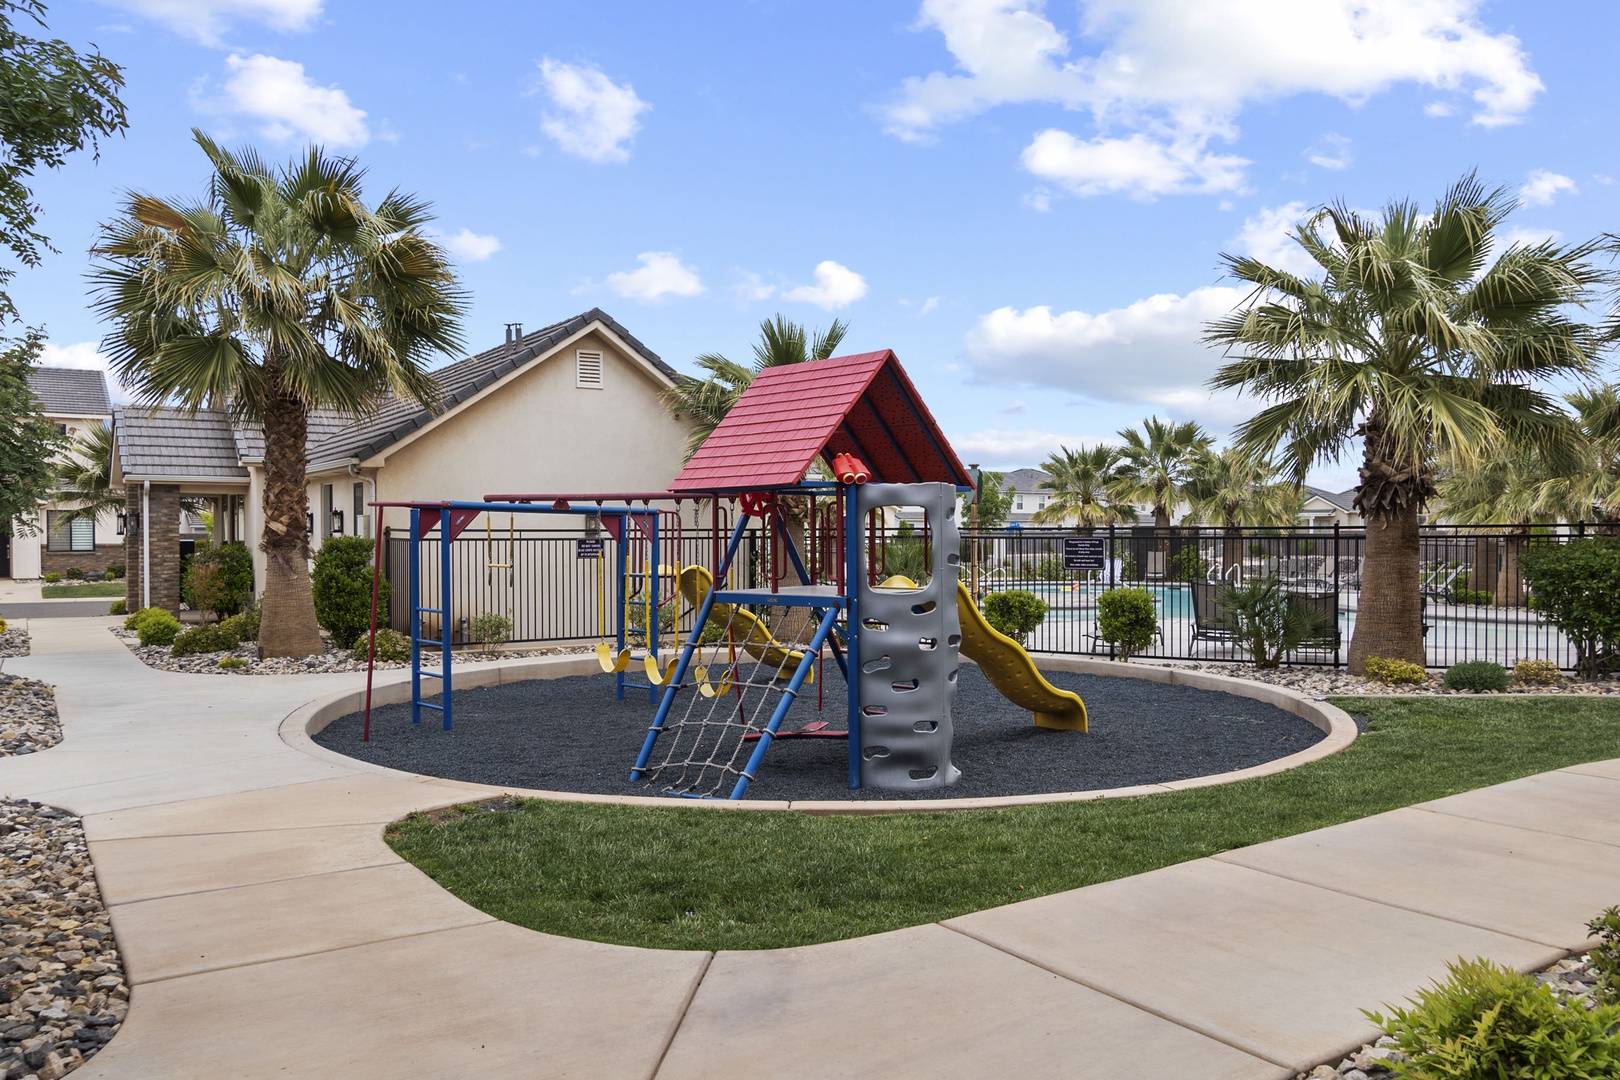 If you’re traveling with littles, take a trip over to the community playground